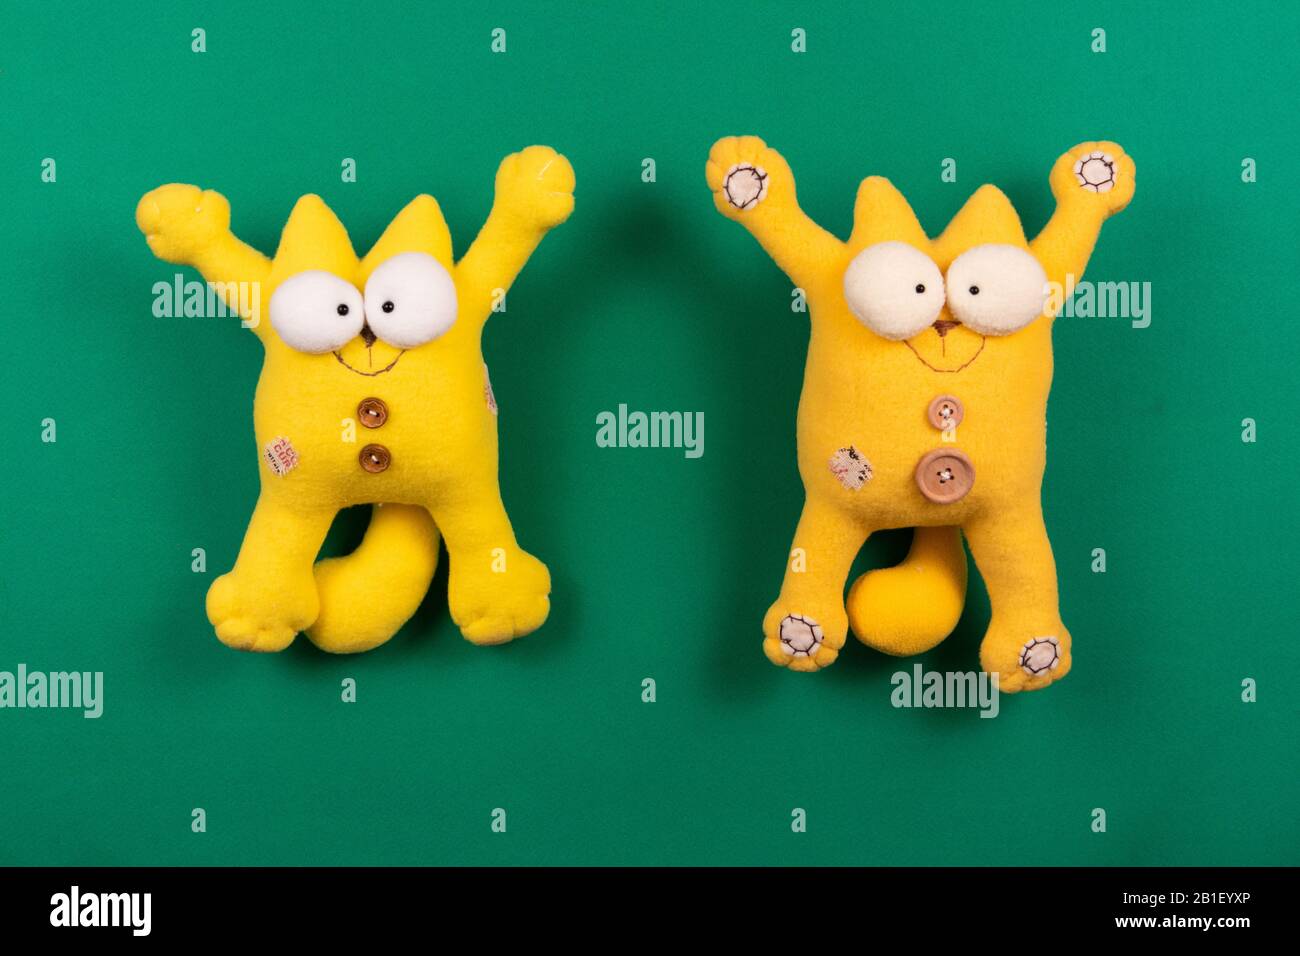 Two funny friendly smiling yellow cats with open paws against green background, designer soft toys Stock Photo